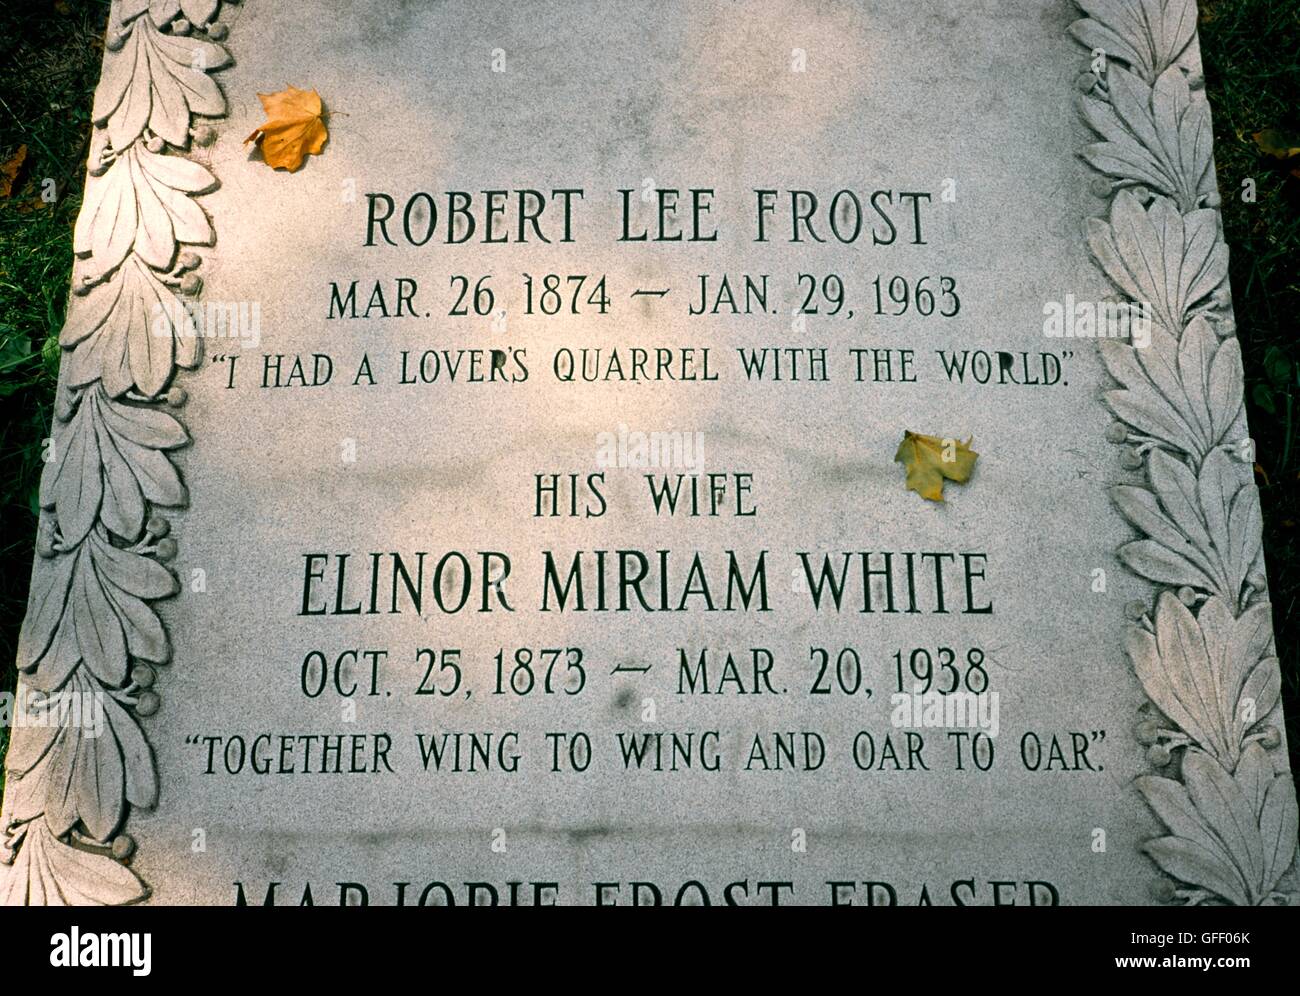 Gravestone of poet Robert Frost and wife at First Congregational Church in town of Bennington, Vermont, New England, USA Stock Photo